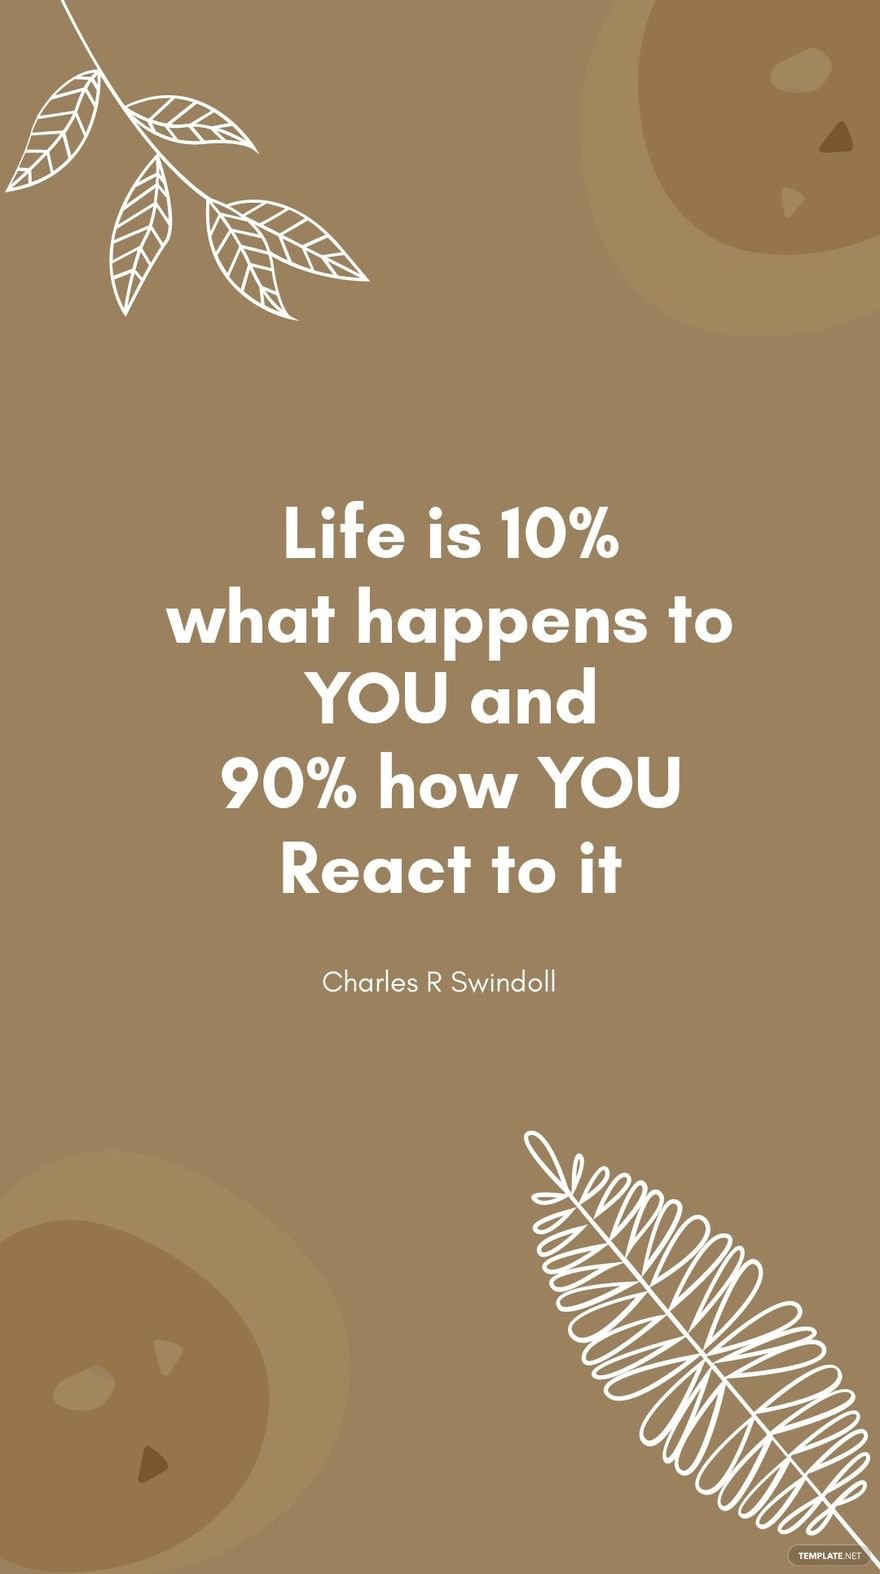 Charles R Swindoll - Life is 10% what happens to you and 90% how you react to it in JPG